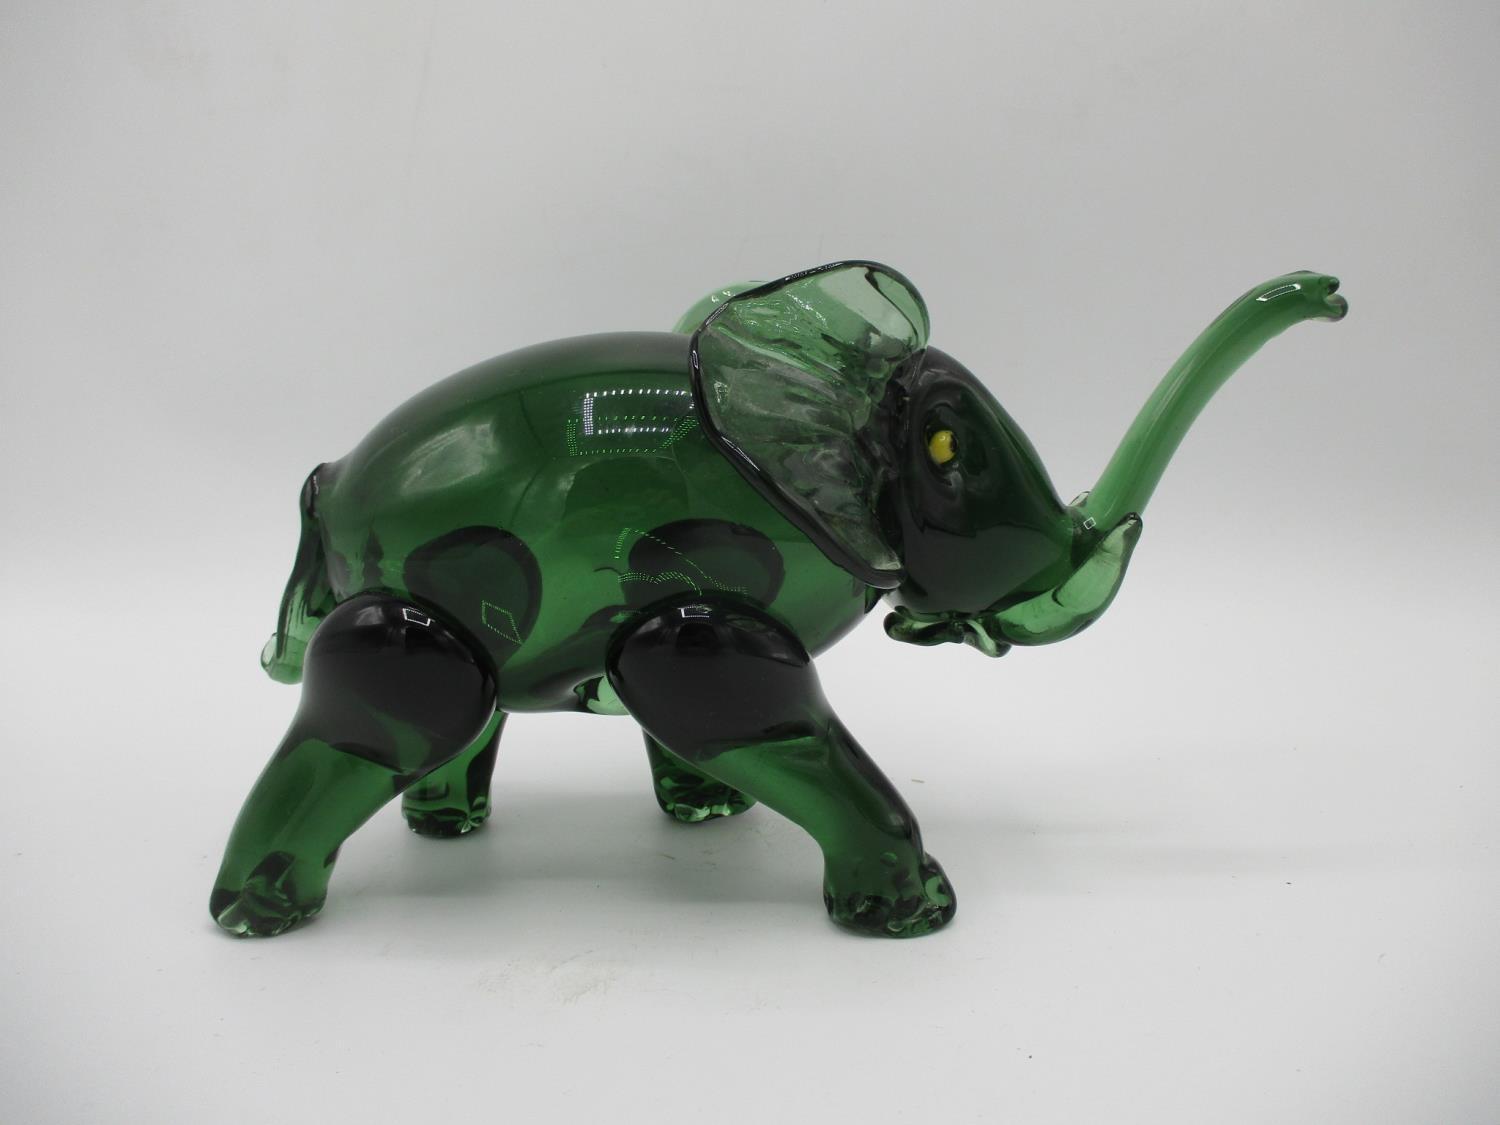 Attributed to Vetreria Artistica Barovier or Martinuzzi, a large green glass model of an elephant